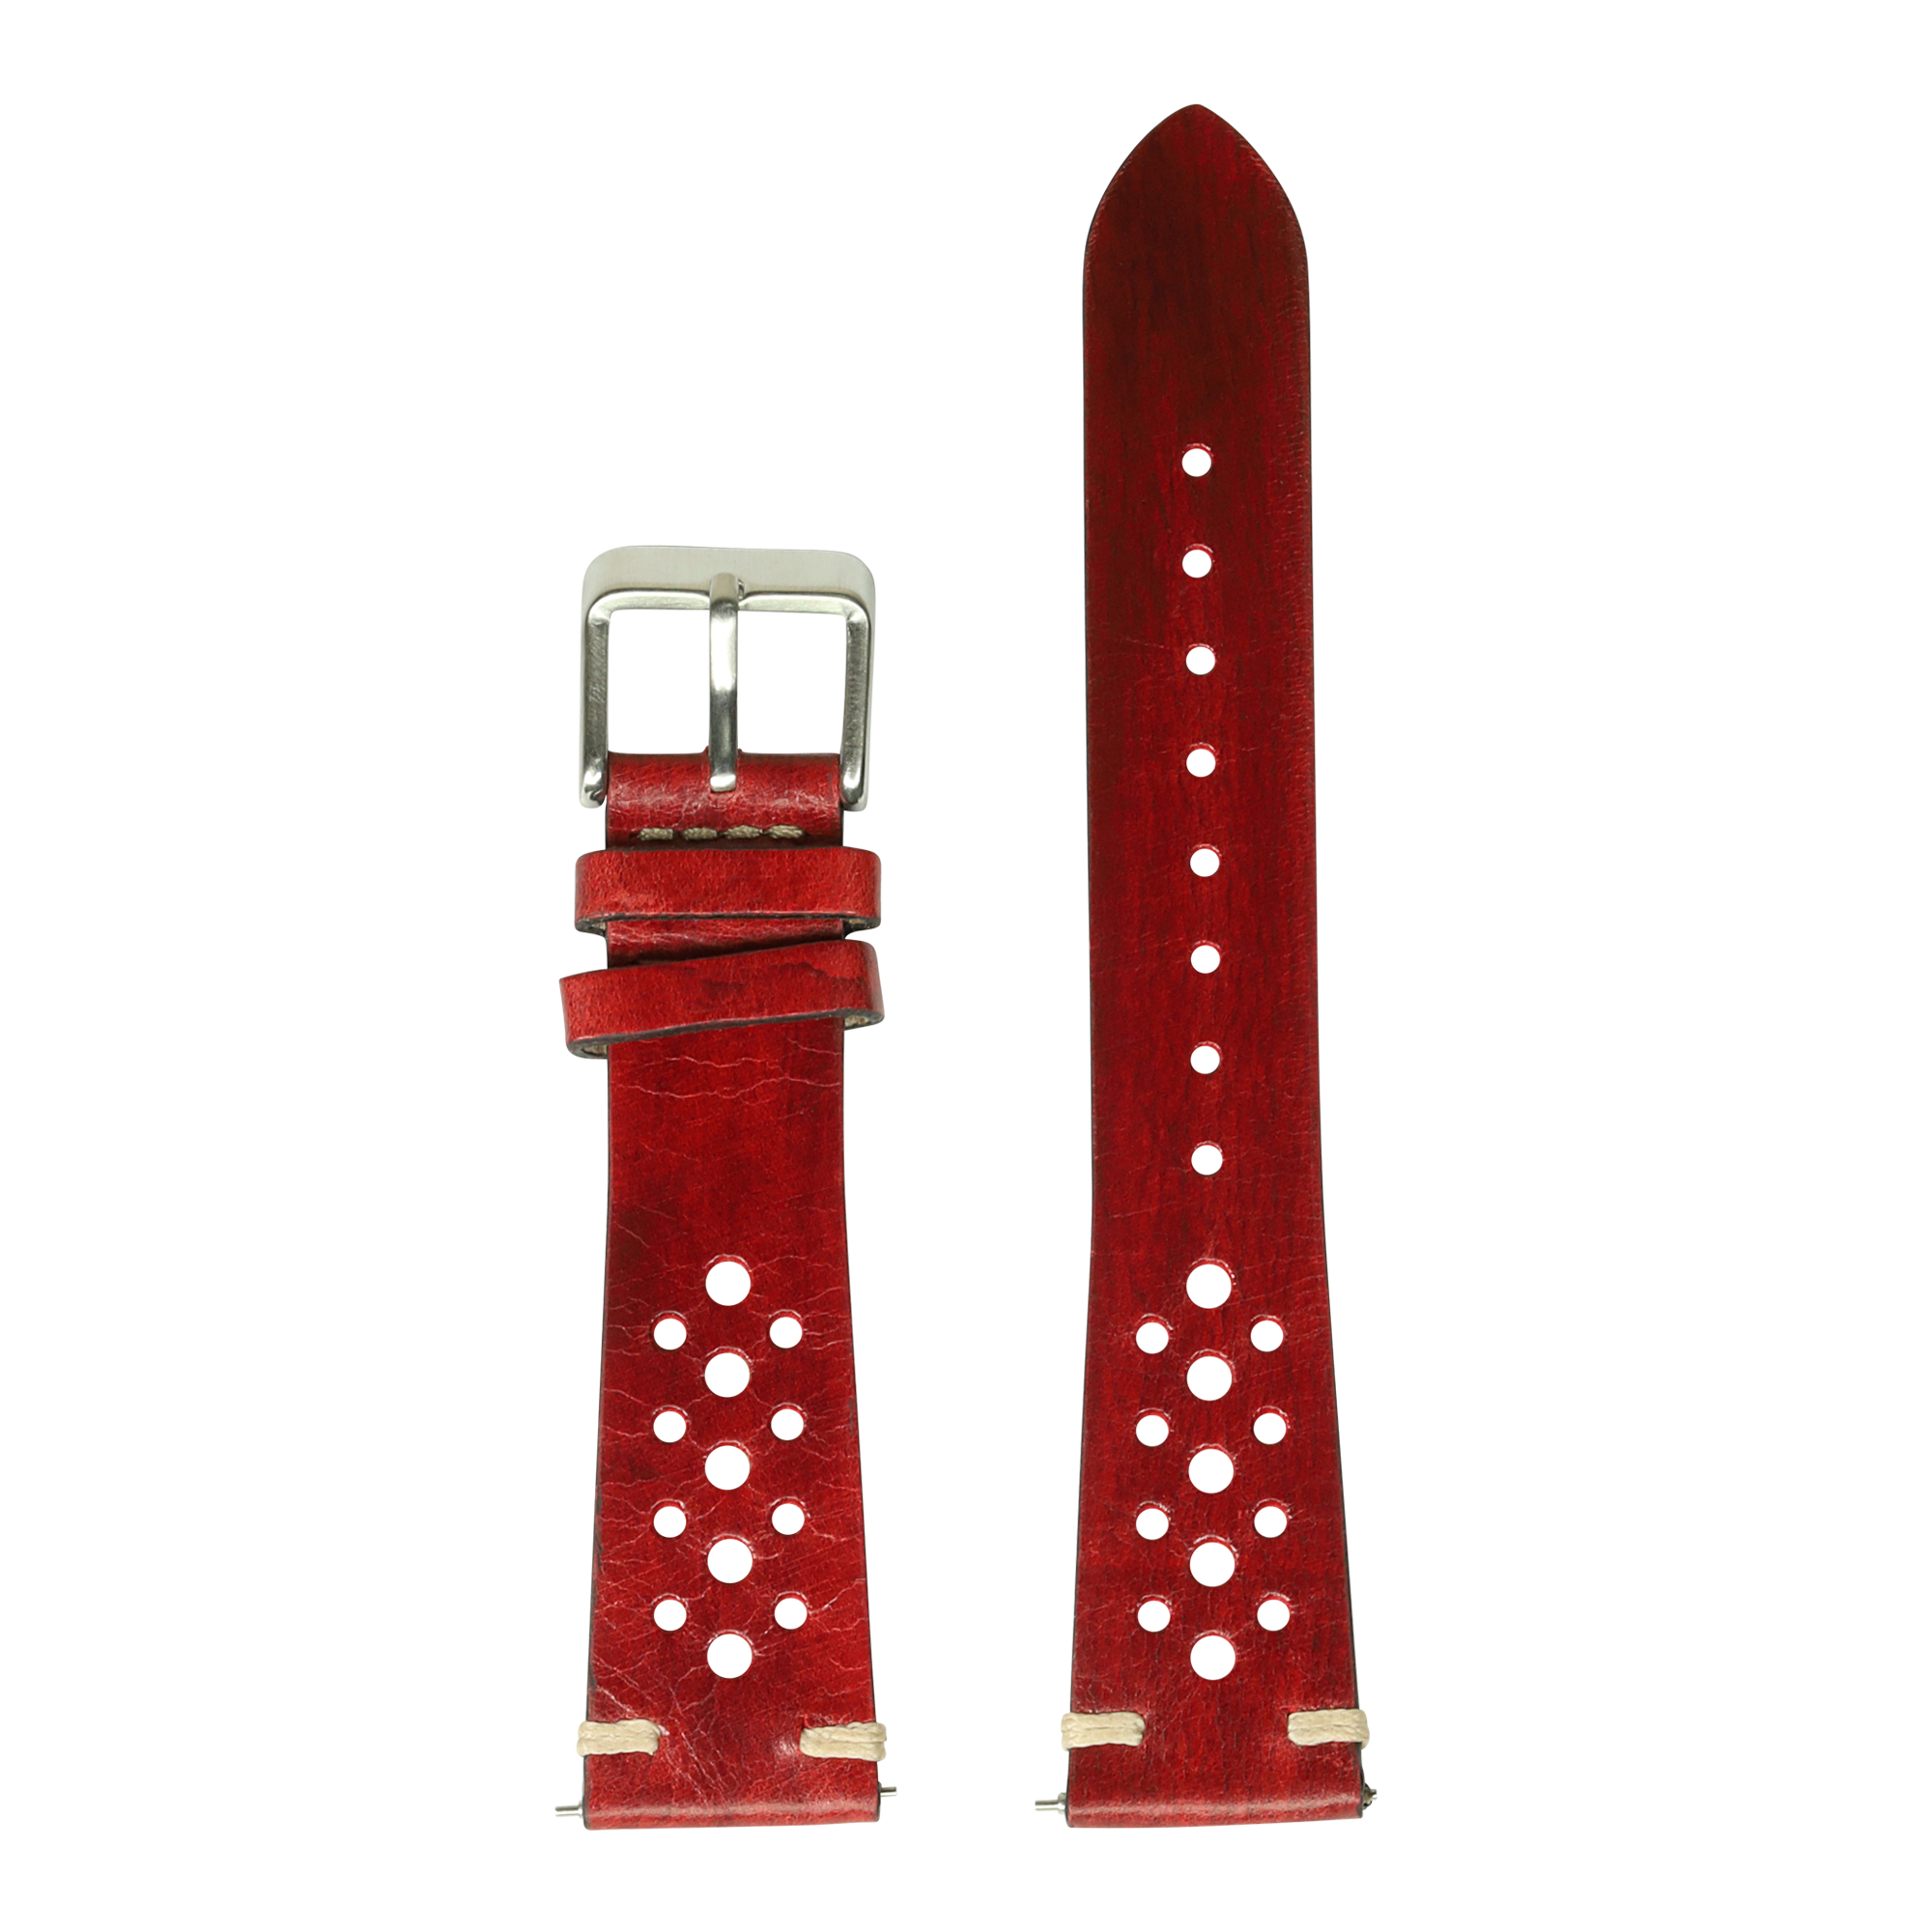 [QuickFit] Vintage Rally Leather - Burnished Red 22mm